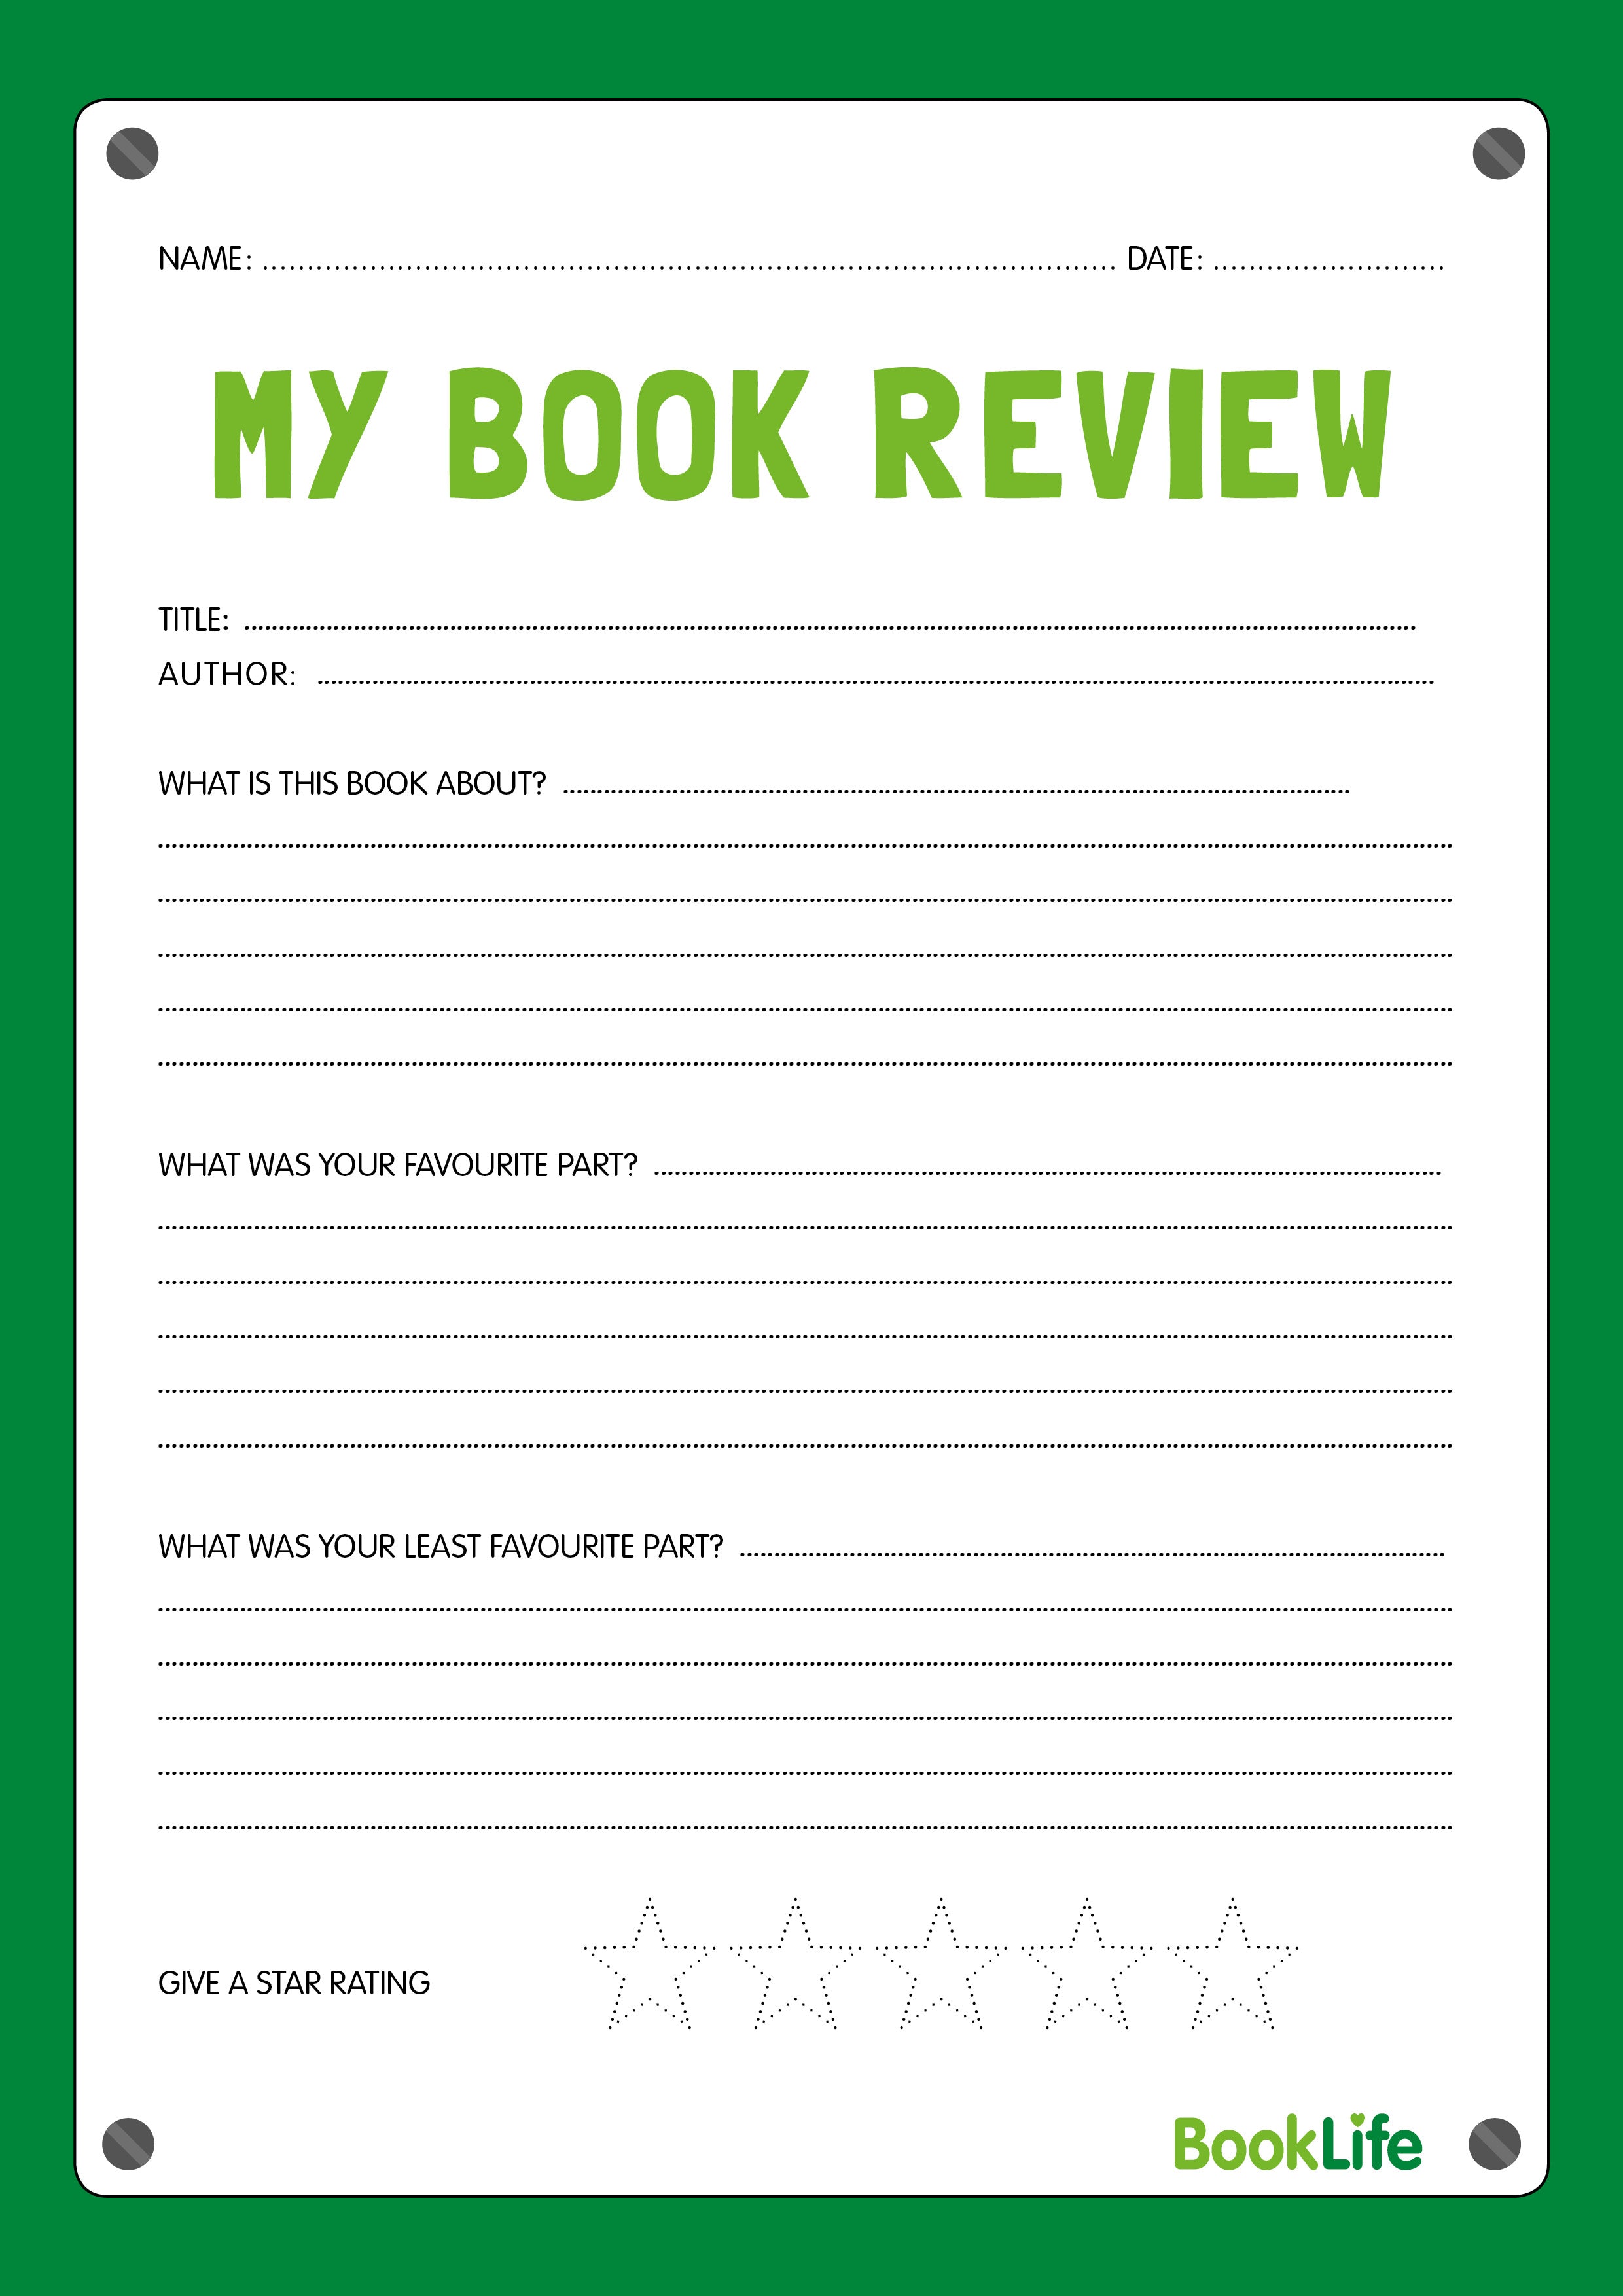 Free 'My Book Review' Worksheet by BookLife